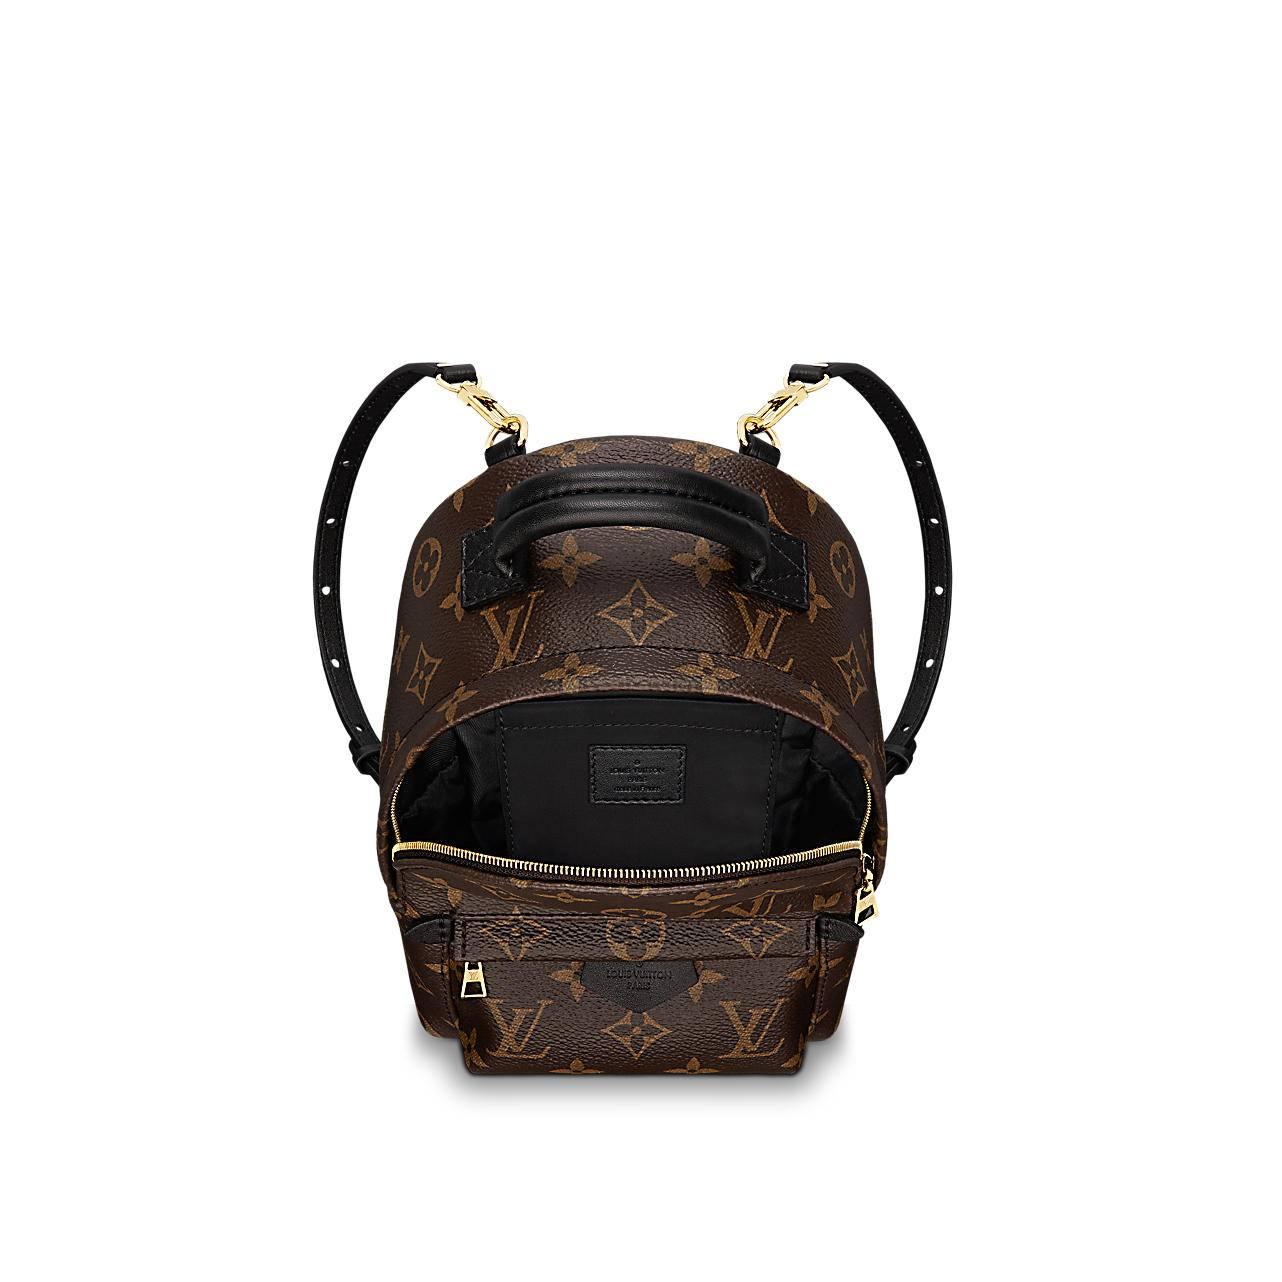 Nicolas Ghesquière gave a surprising twist to the backpack, turning a utilitarian staple into this trendy and oh-so-covetable city bag. 
The sweet Mini version in soft Monogram canvas sports a multi-positional strap for cross-body wear.So